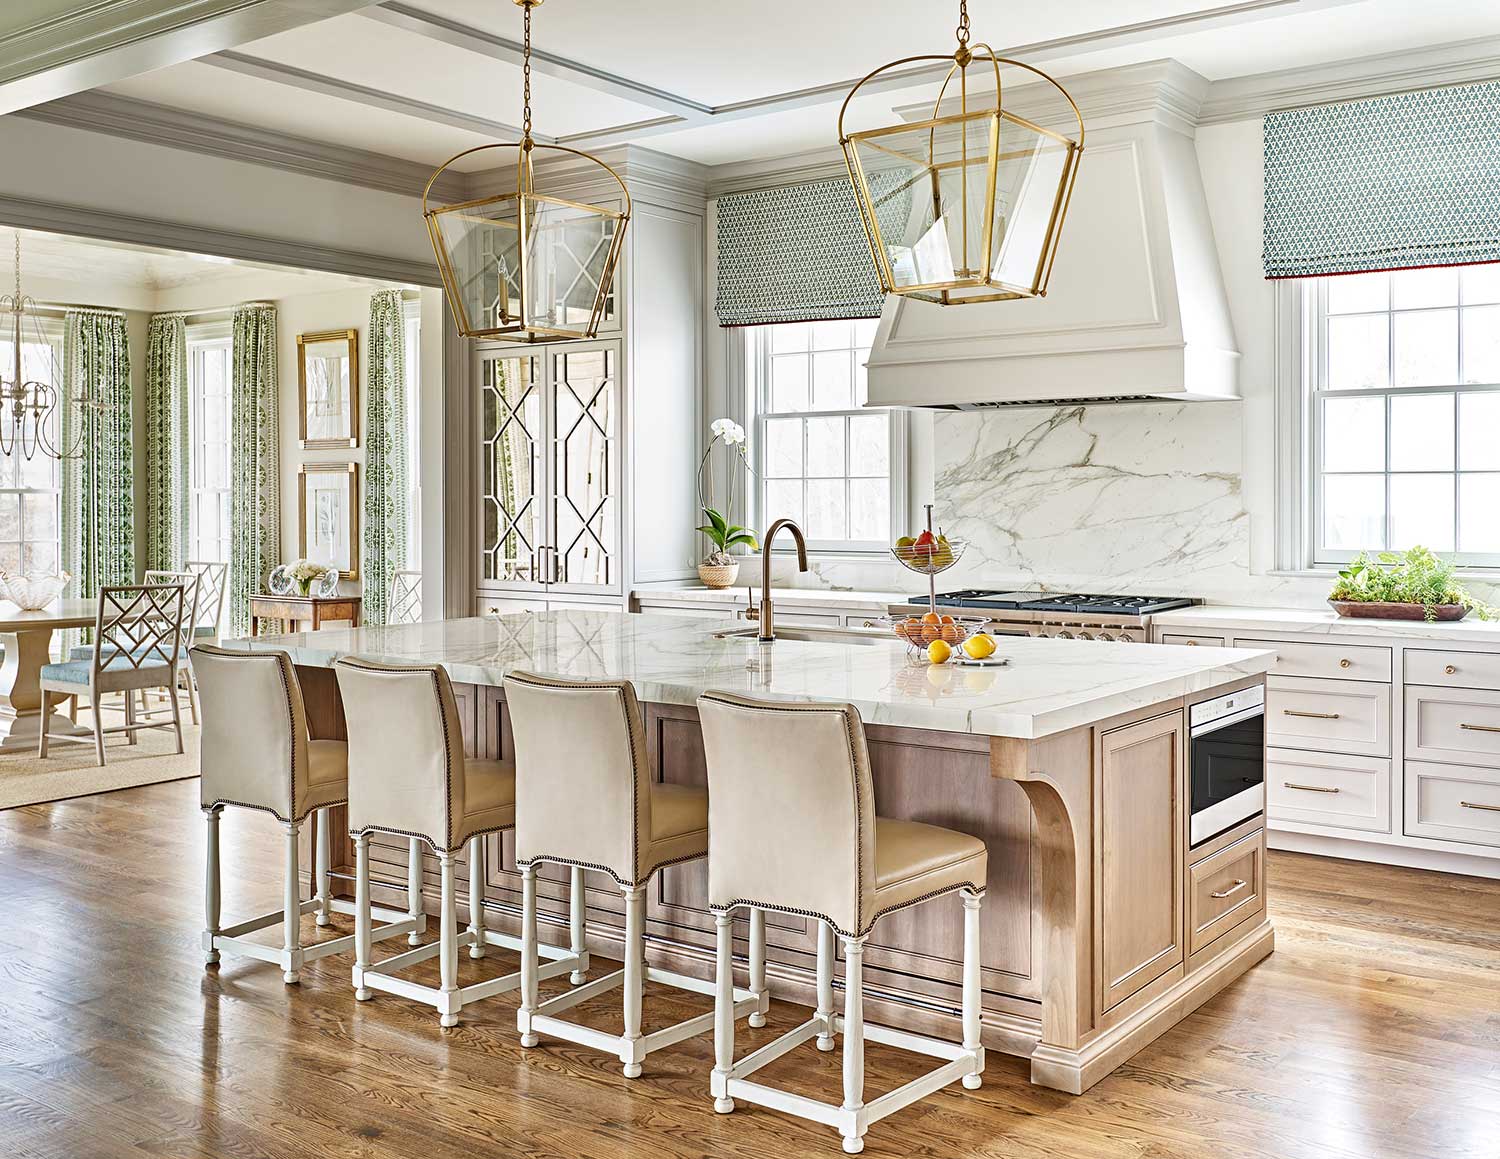 kitchen with white cabinetry and large range hood, green patterned roman shades, marble countertops and backsplash and tan counter stools